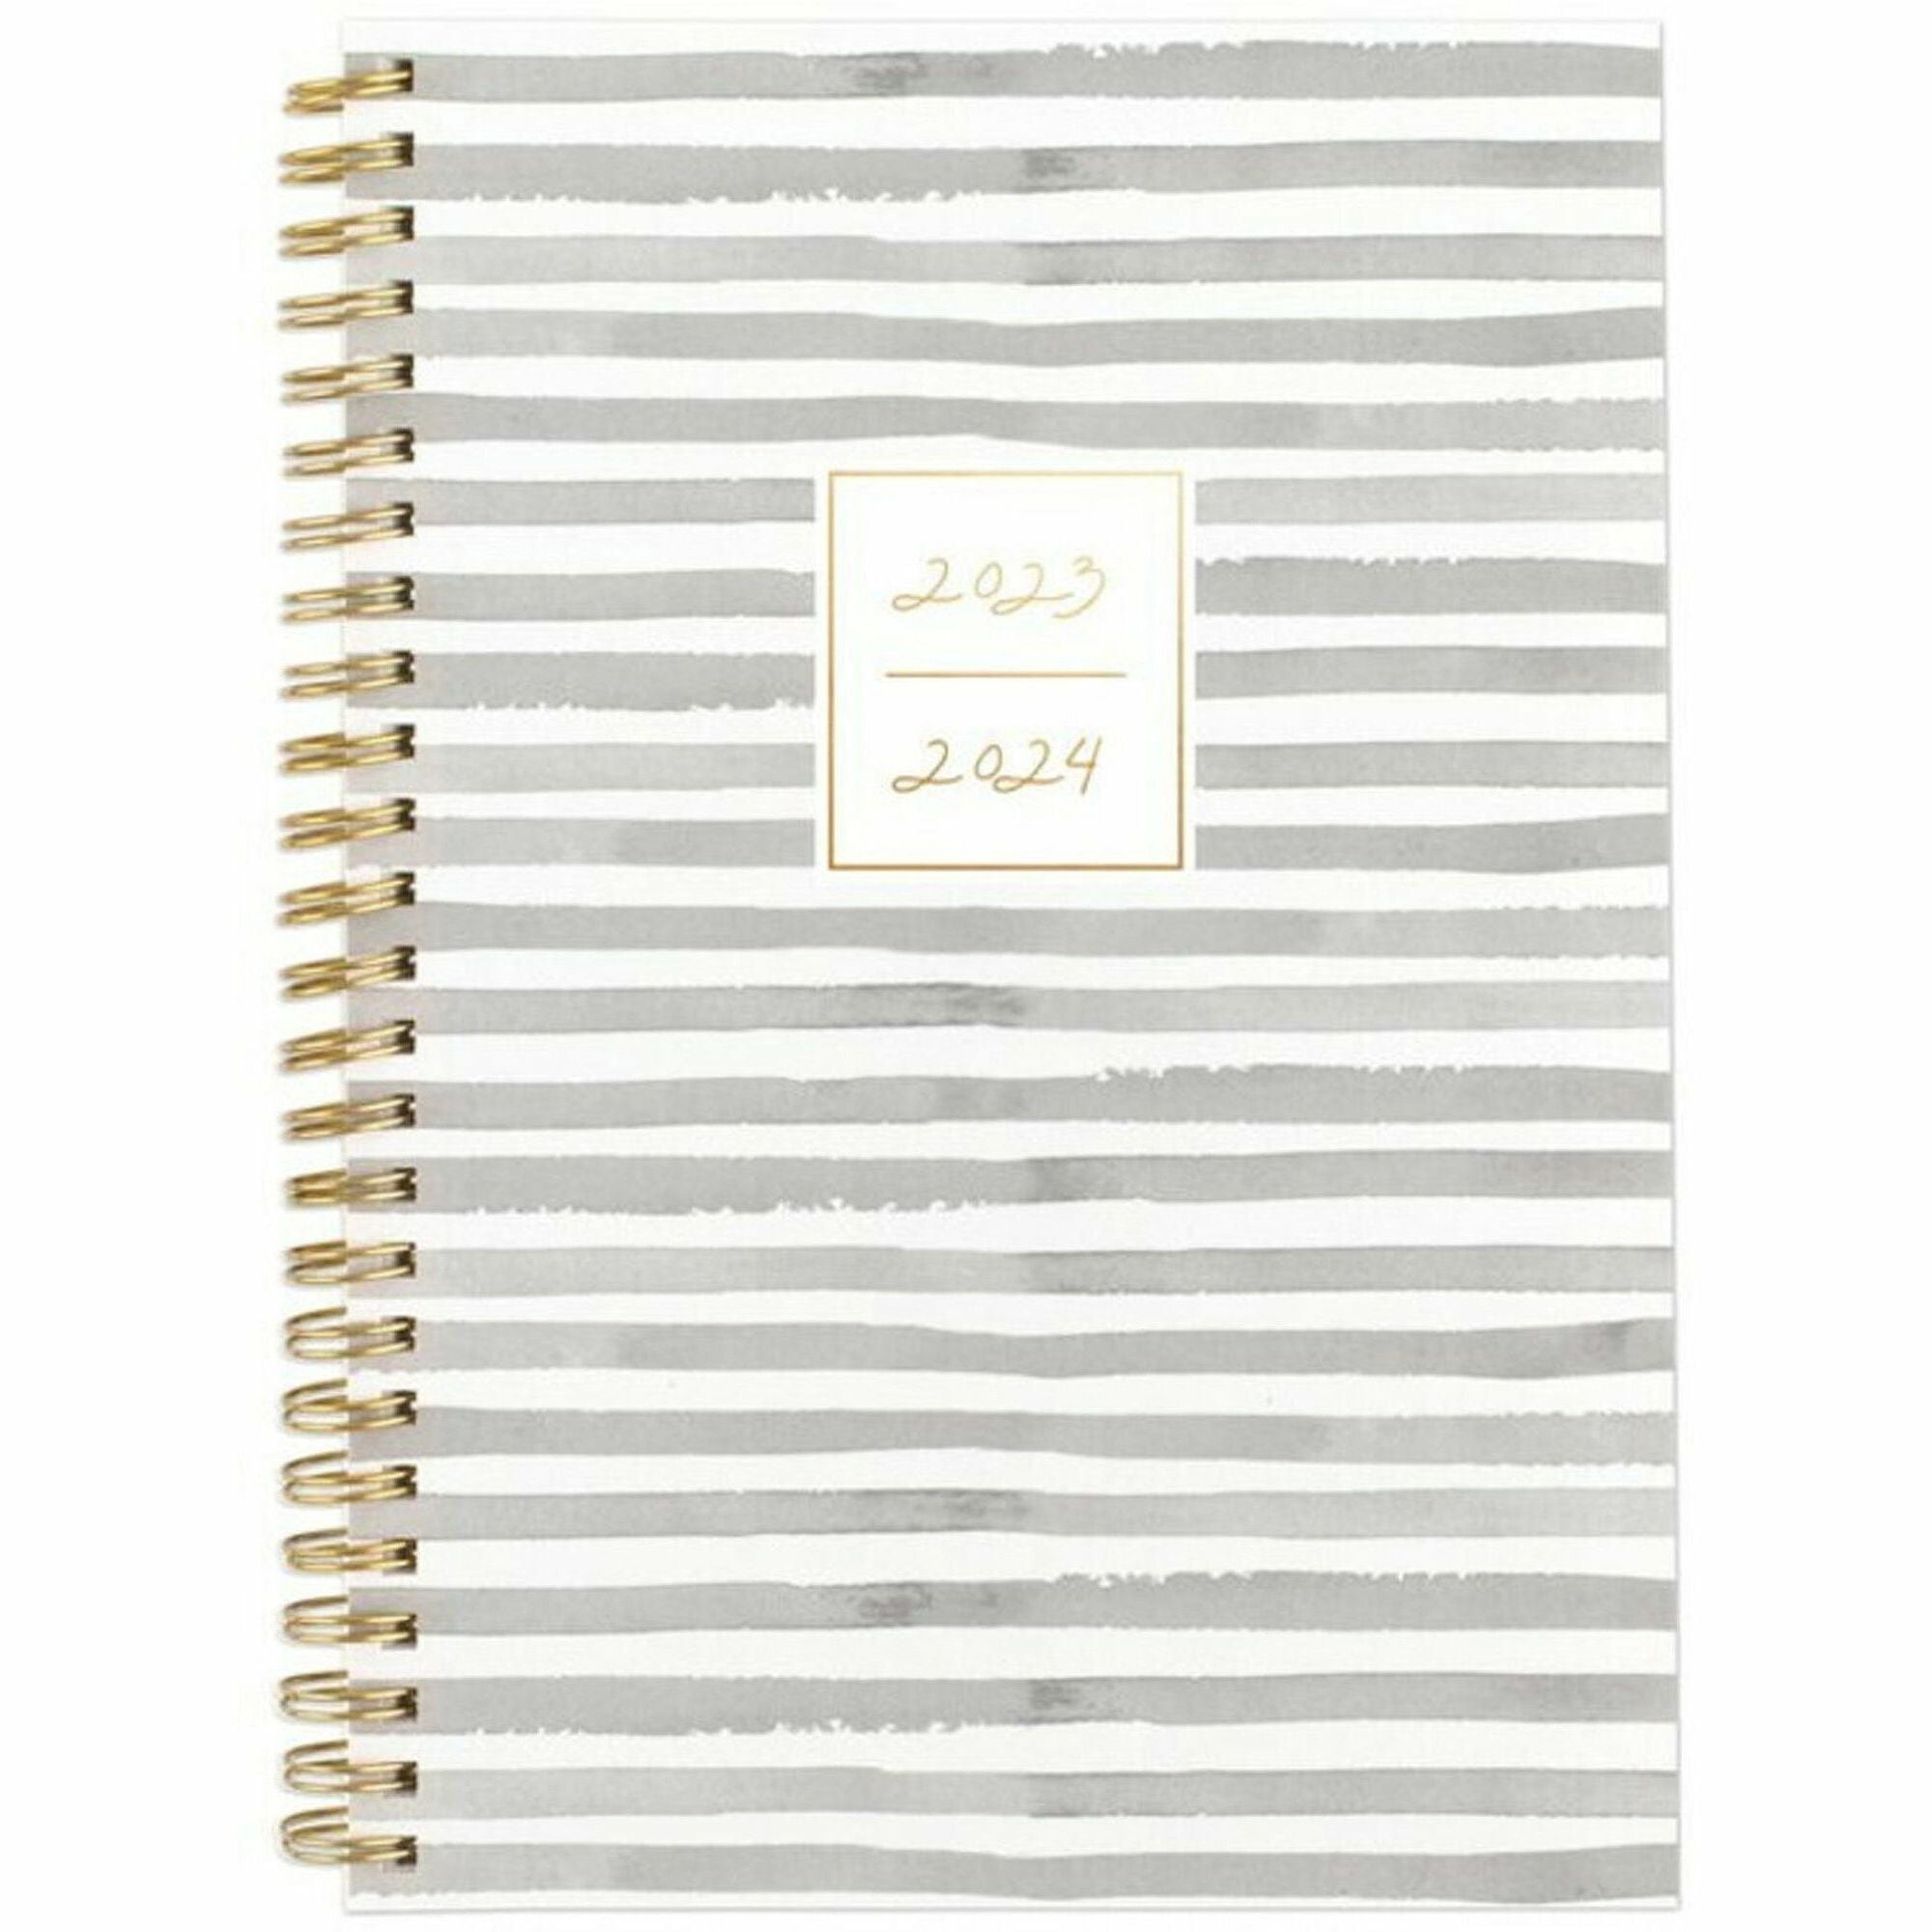 cambridge-leah-bisch-academic-planner-small-size-academic-monthly-weekly-12-month-july-2023-june-2024-1-week-1-month-double-page-layout-5-1-2-x-8-1-2-sheet-size-twin-wire-gray-white-flexible-cover-unruled-planning-space-n_aaglb20200a - 1